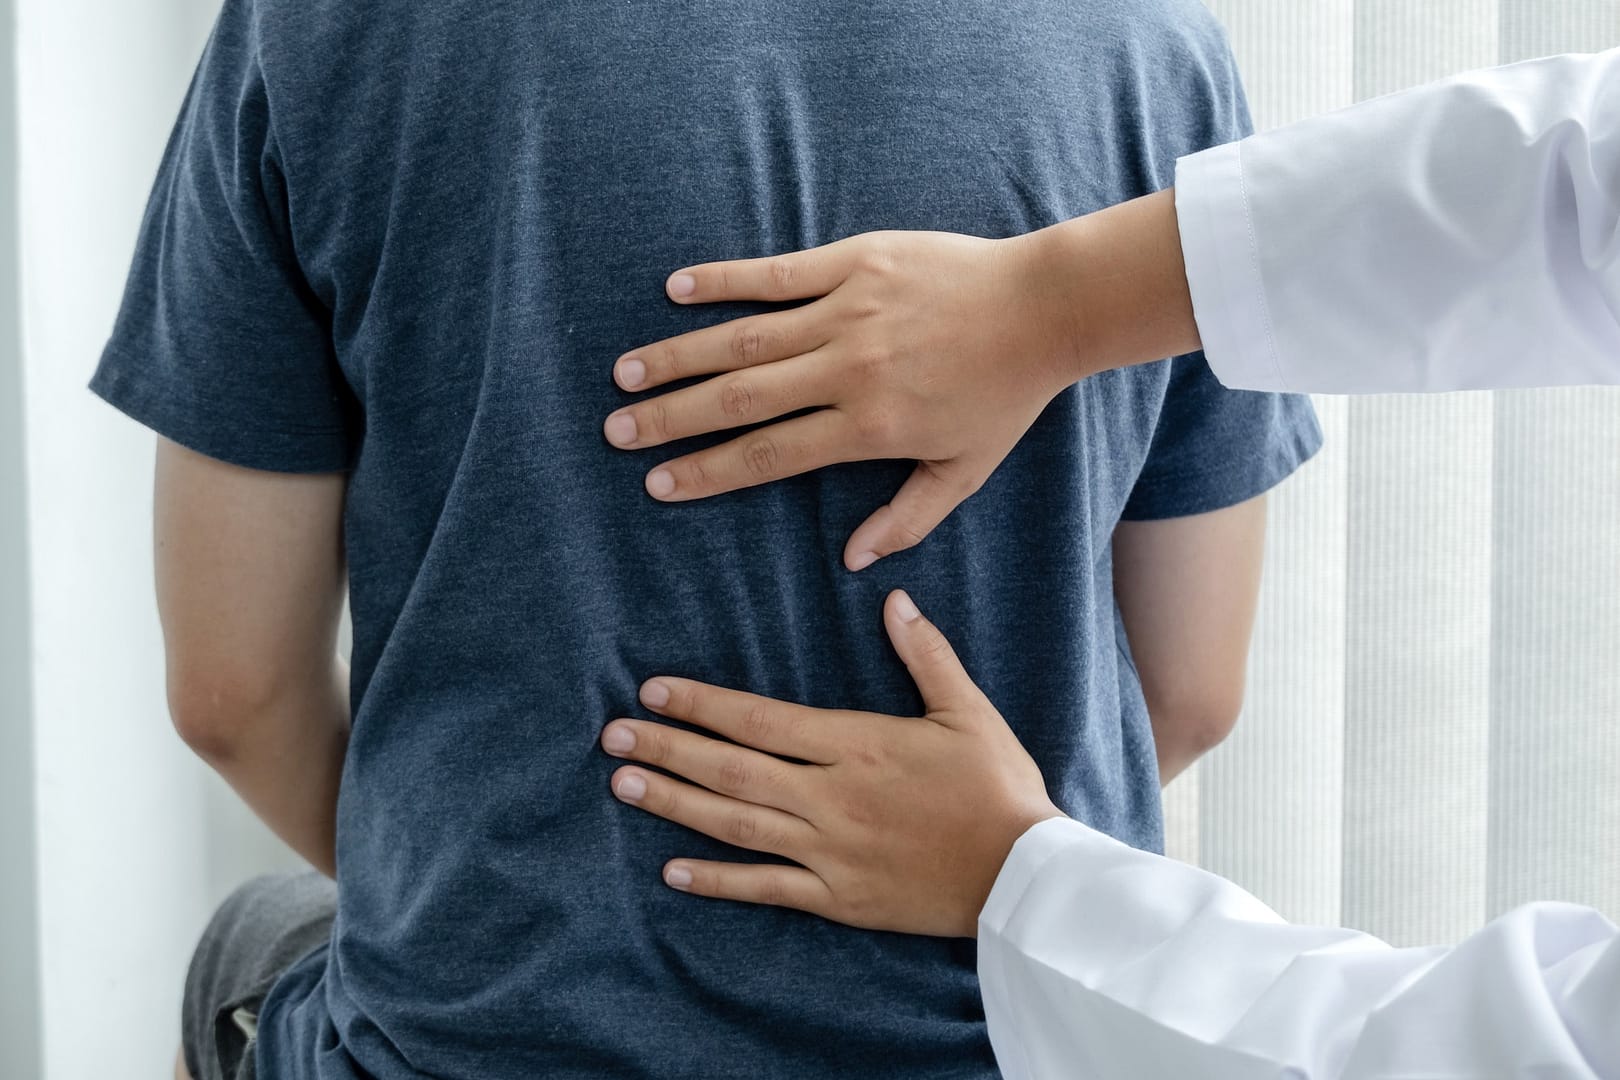 Male patients consulted physiotherapists with Low back pain for examination and treatment